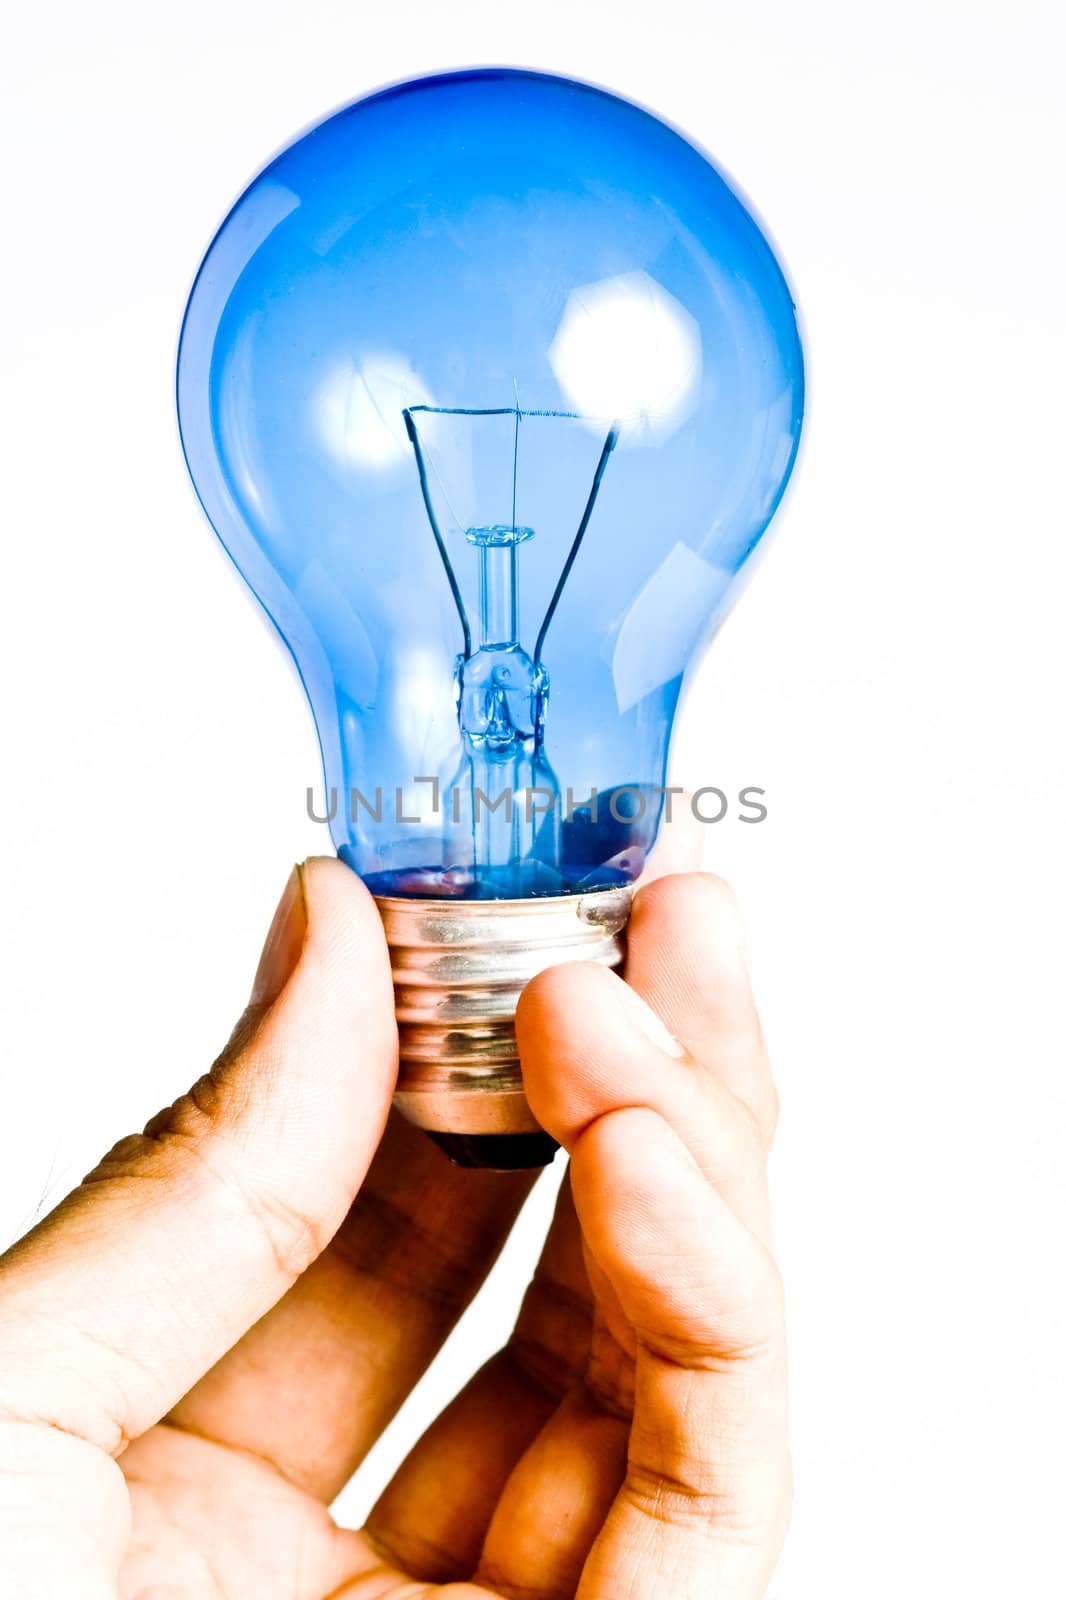 Blue light bulb in the hand, Isolated